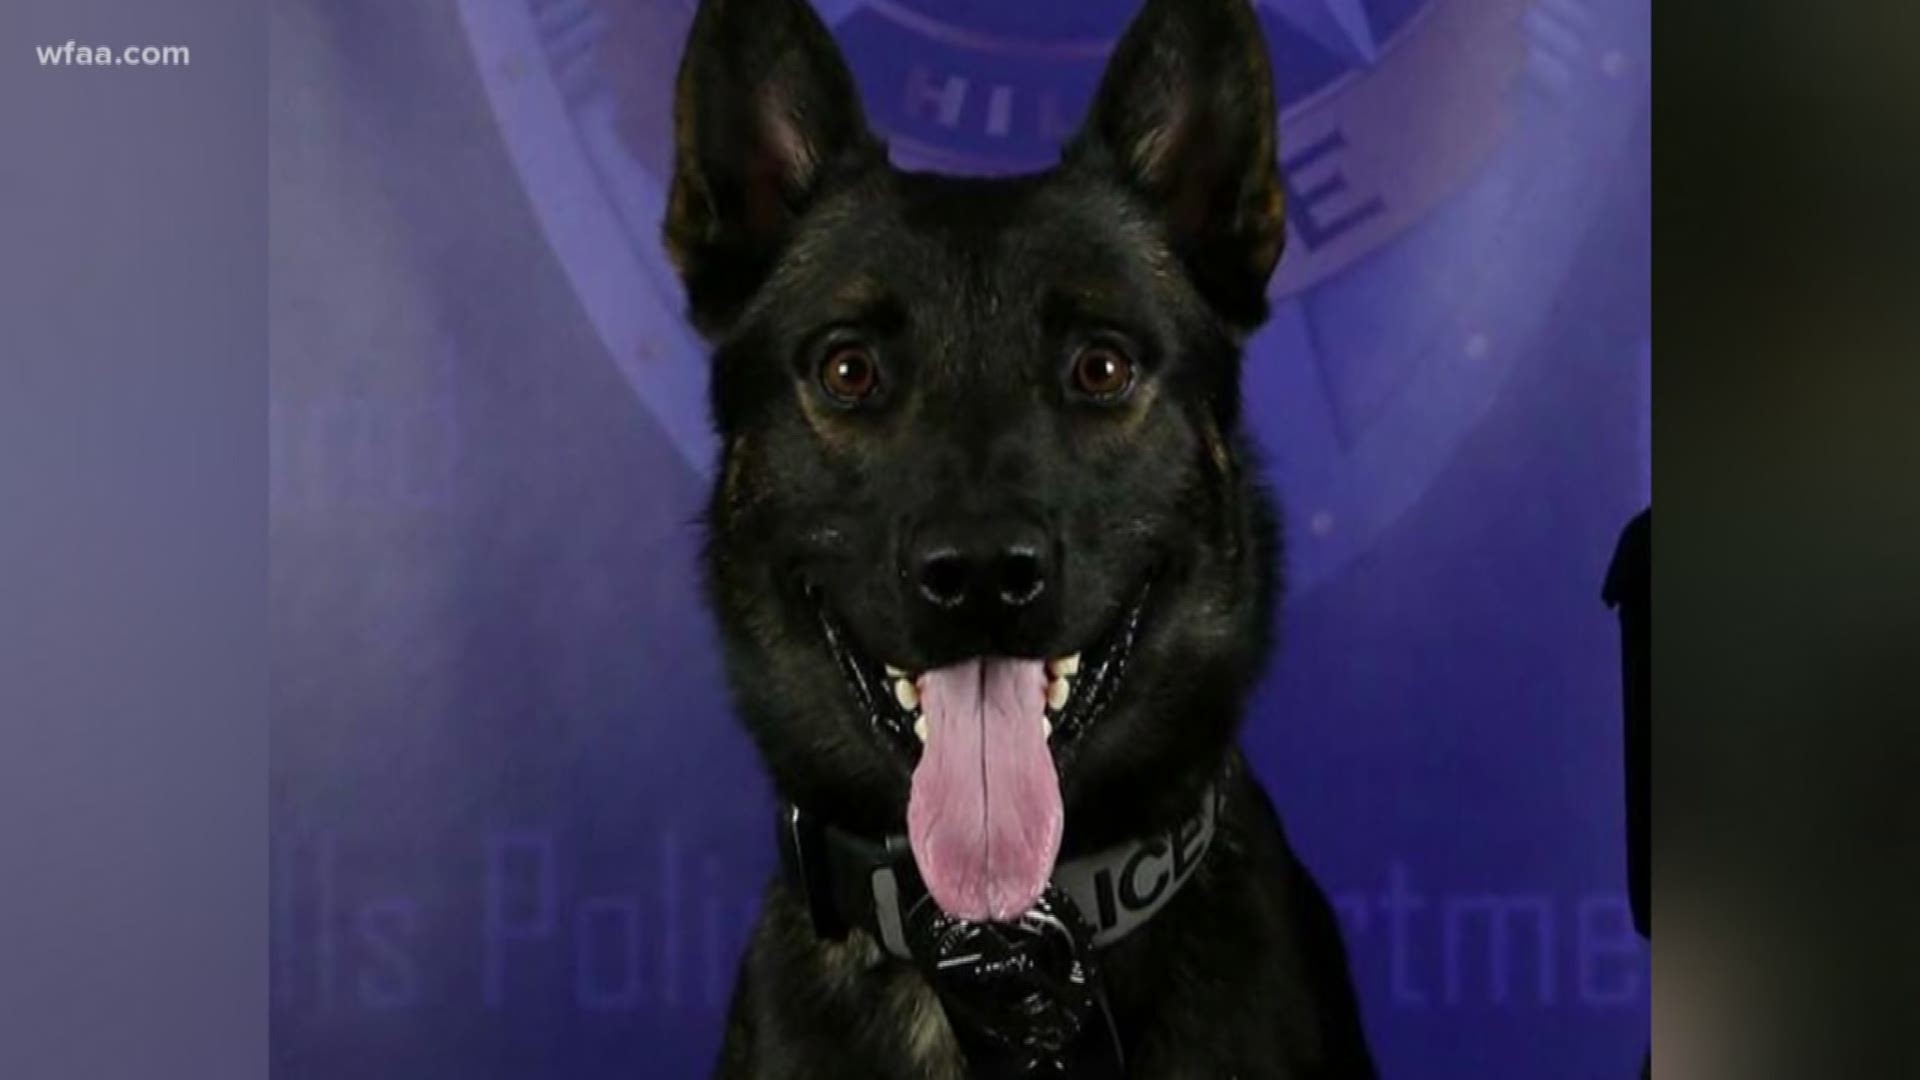 The dog was shot in the line of duty in January.